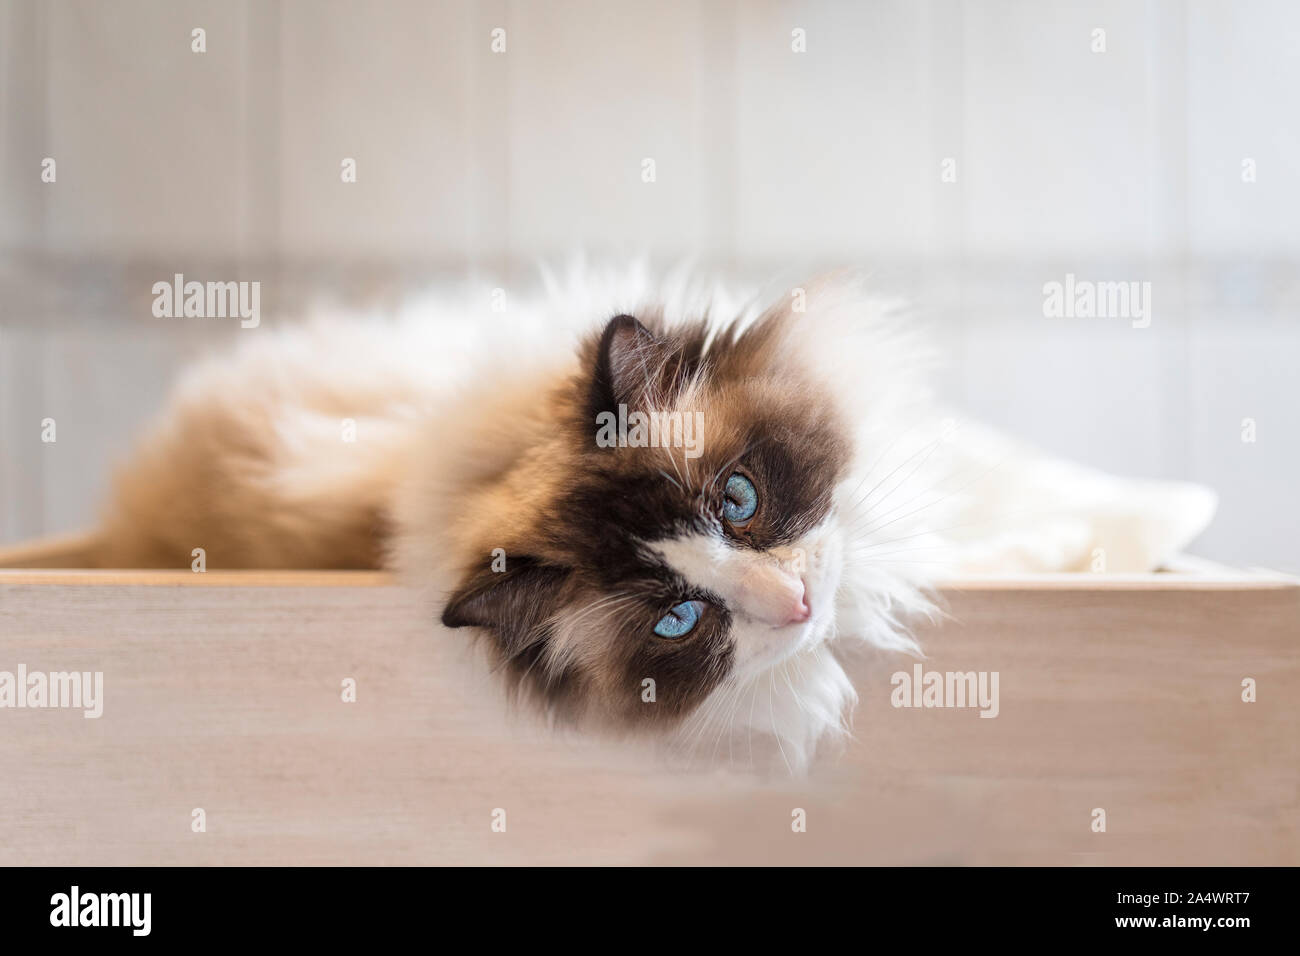 A pretty bicolor brown Ragdoll cat. The cute cat has its head hanging on a wooden bench and is looking at the viewer. Stock Photo